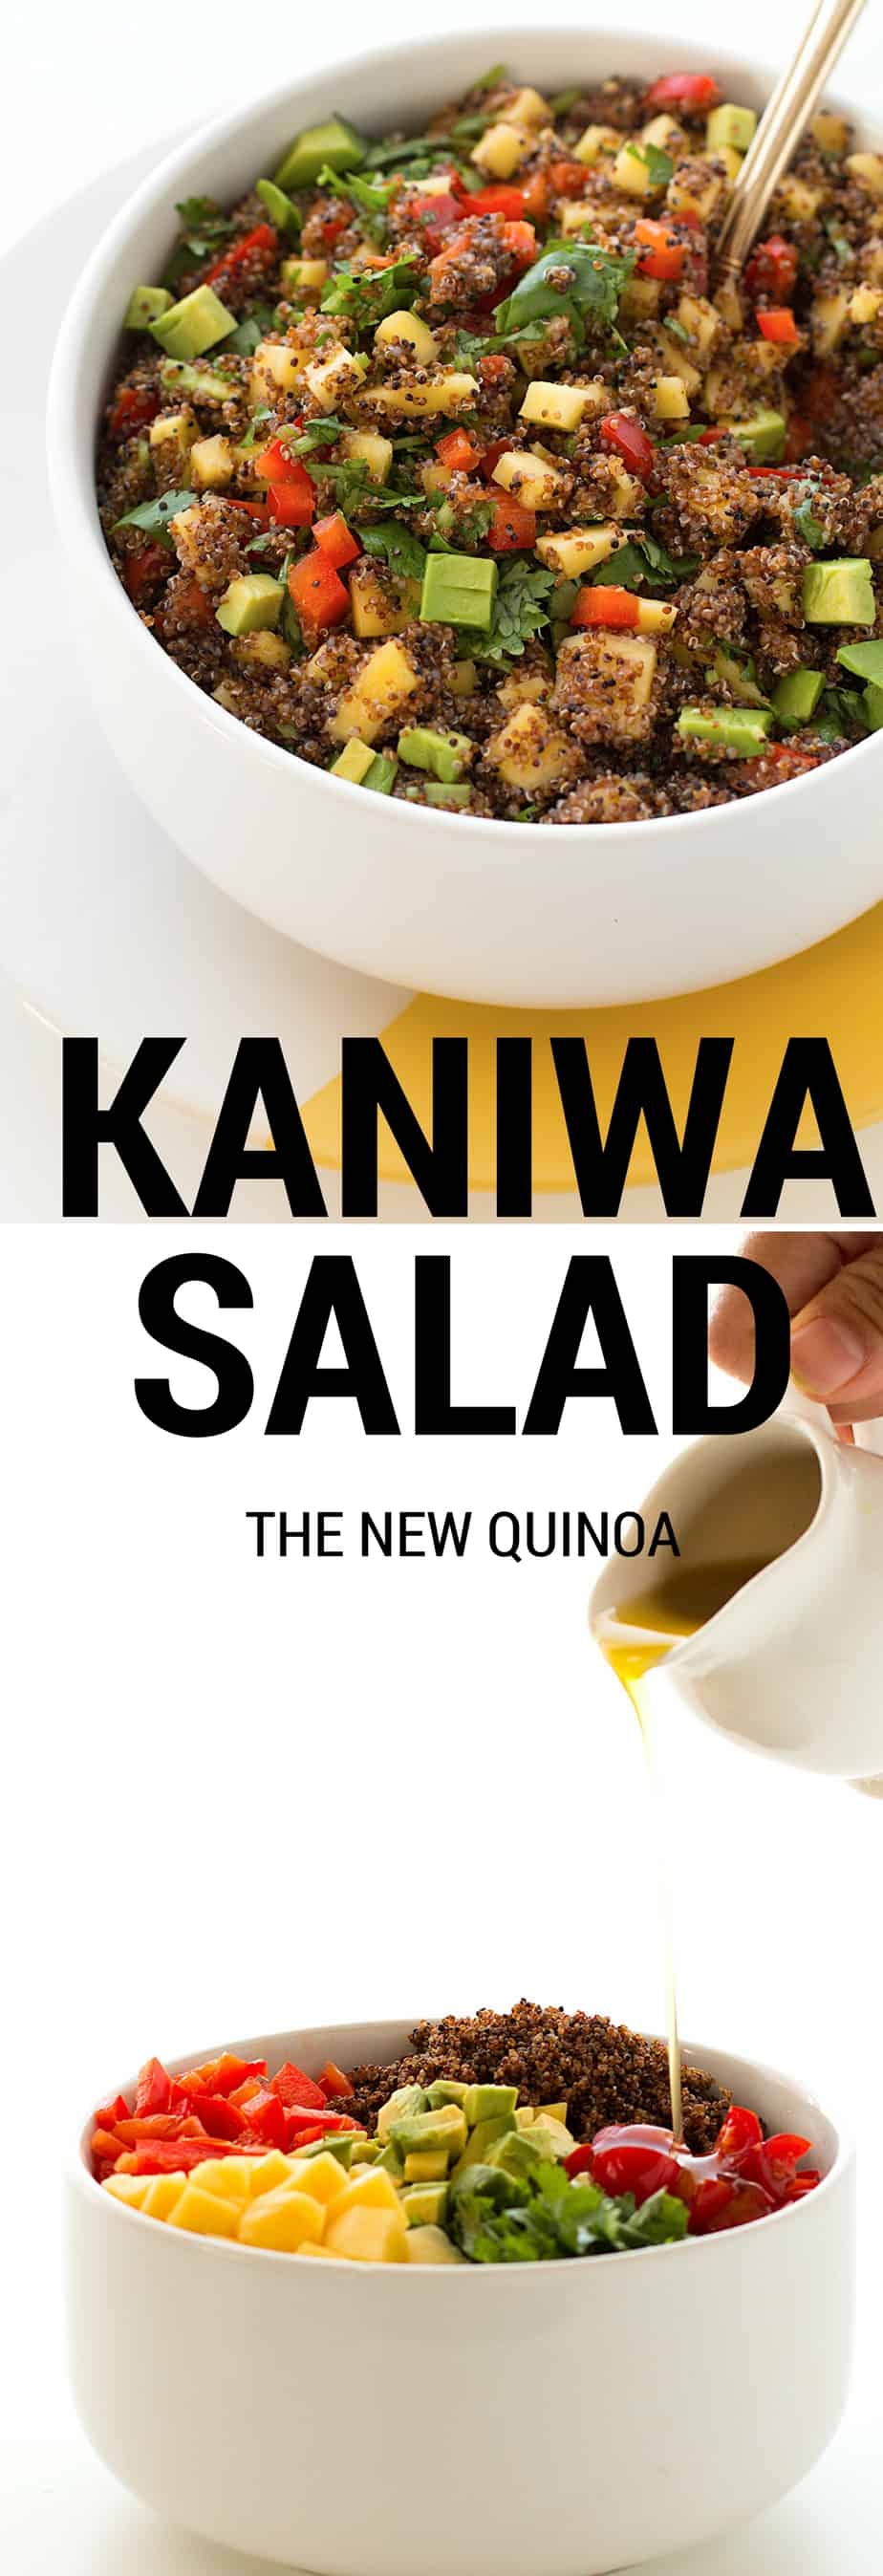 KANIWA SALAD THE NEW QUINOA. I present to you kaniwa, a supergrain related to Quinoa. Both kaniwa and quinoa are good sources of protein, calcium, iron and flavonoids. Quinoa seems to get all of the attention these days but kaniwa are smaller in size which gives them a completely different experience and texture in whatever dish you are preparing, be it a kaniwa salad, a kaniwa breakfast recipe (Kaniwa pancakes are amazing), or a Kaniwa Mexican recipe (like Kaniwa fritadas). These superfood grains are gluten-free and can be consumed by those who suffer from coeliac disease.